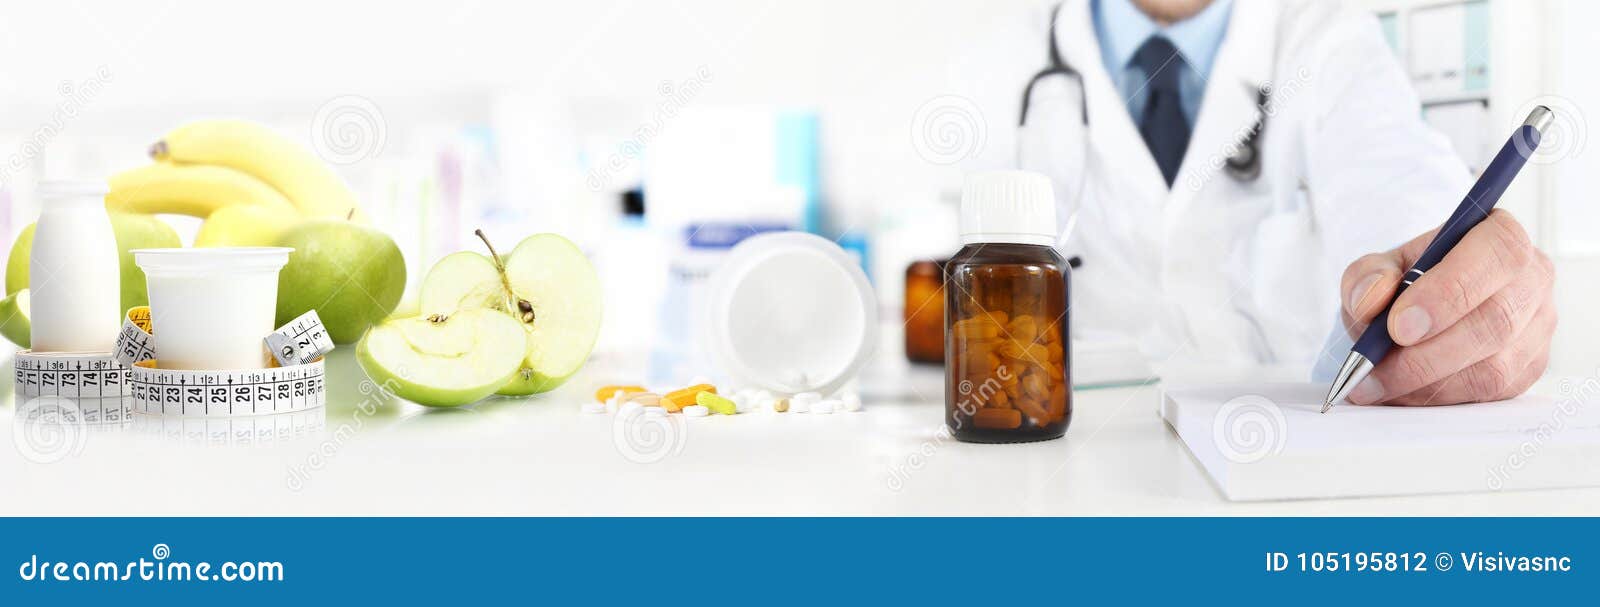 nutritionist doctor writes the medical prescription for a correct diet on a desk with fruits, drugs and supplements, web banner